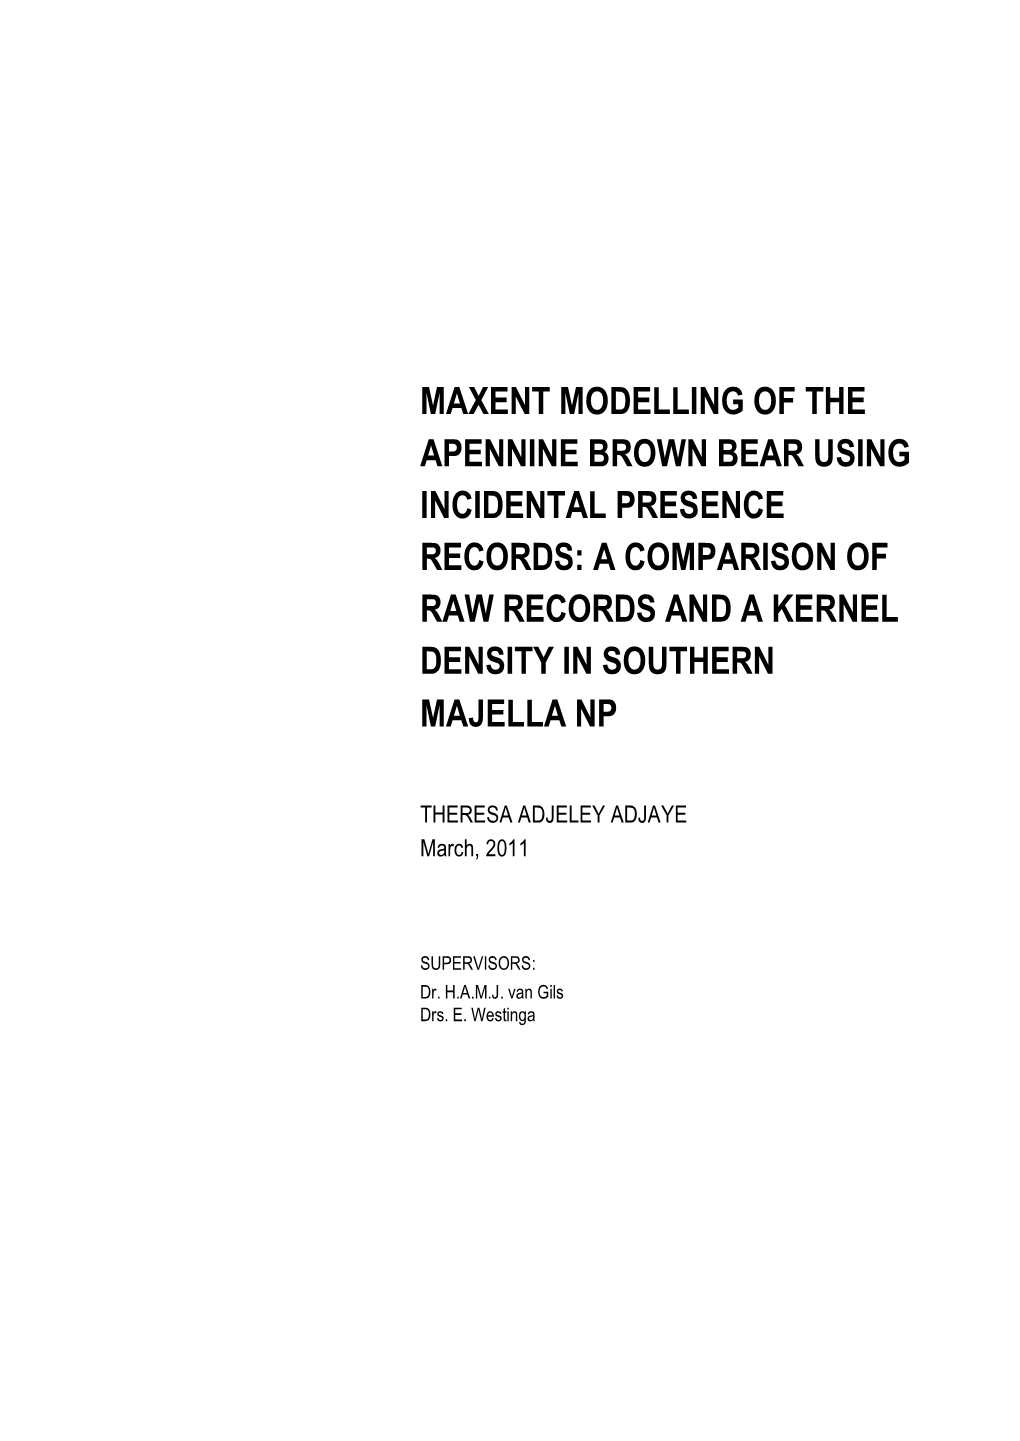 Maxent Modelling of the Apennine Brown Bear Using Incidental Presence Records: a Comparison of Raw Records and a Kernel Density in Southern Majella Np